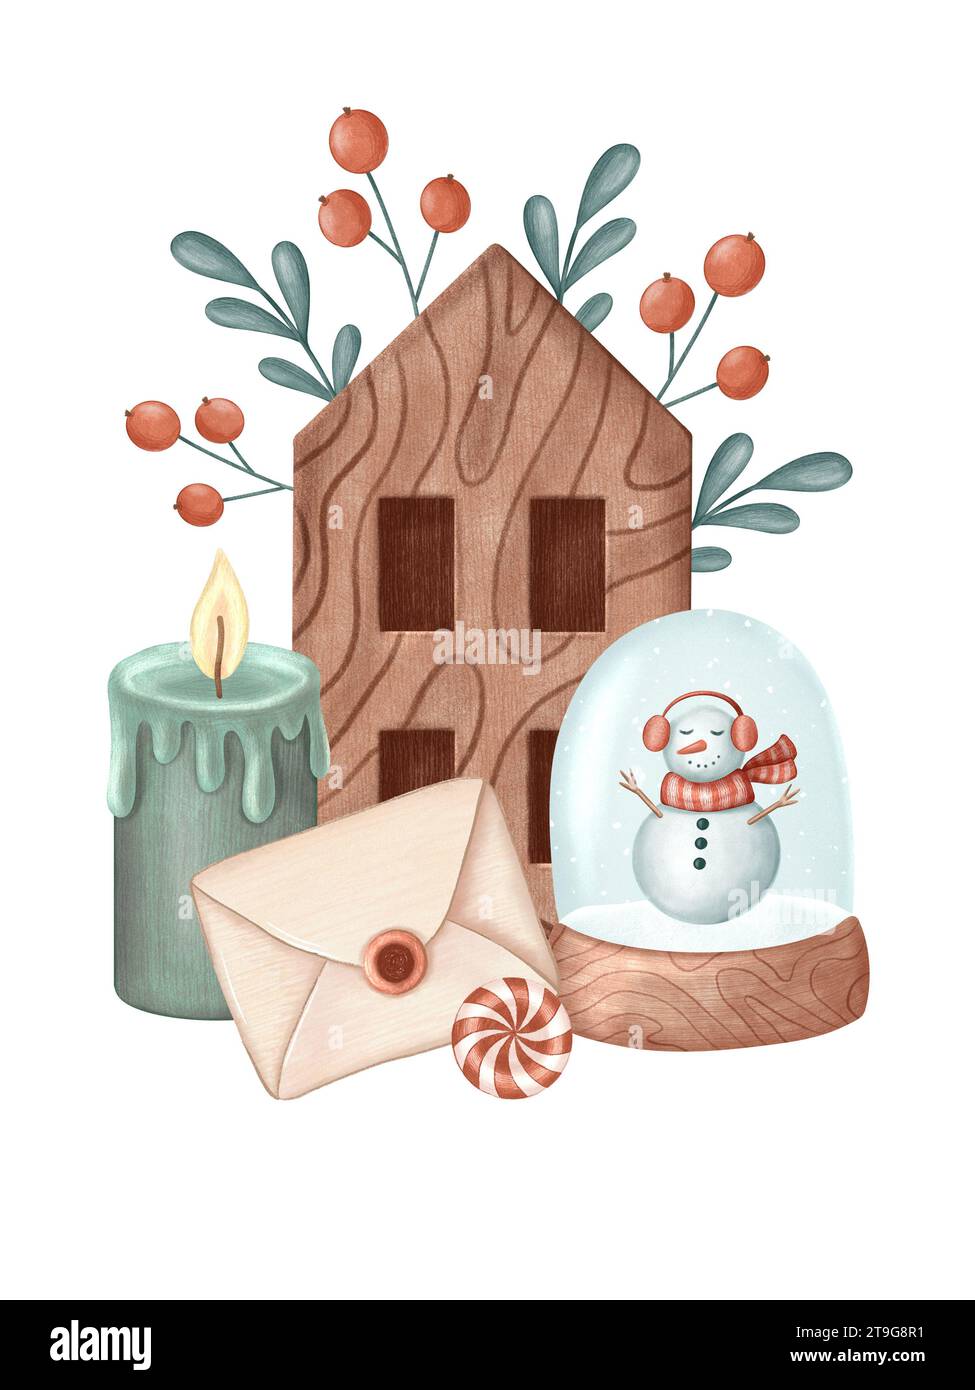 Christmas crayon composition with hand painted seasonal items - wood house, snow man in the snow globe, letter, candle, lollipop. For card, print Stock Photo